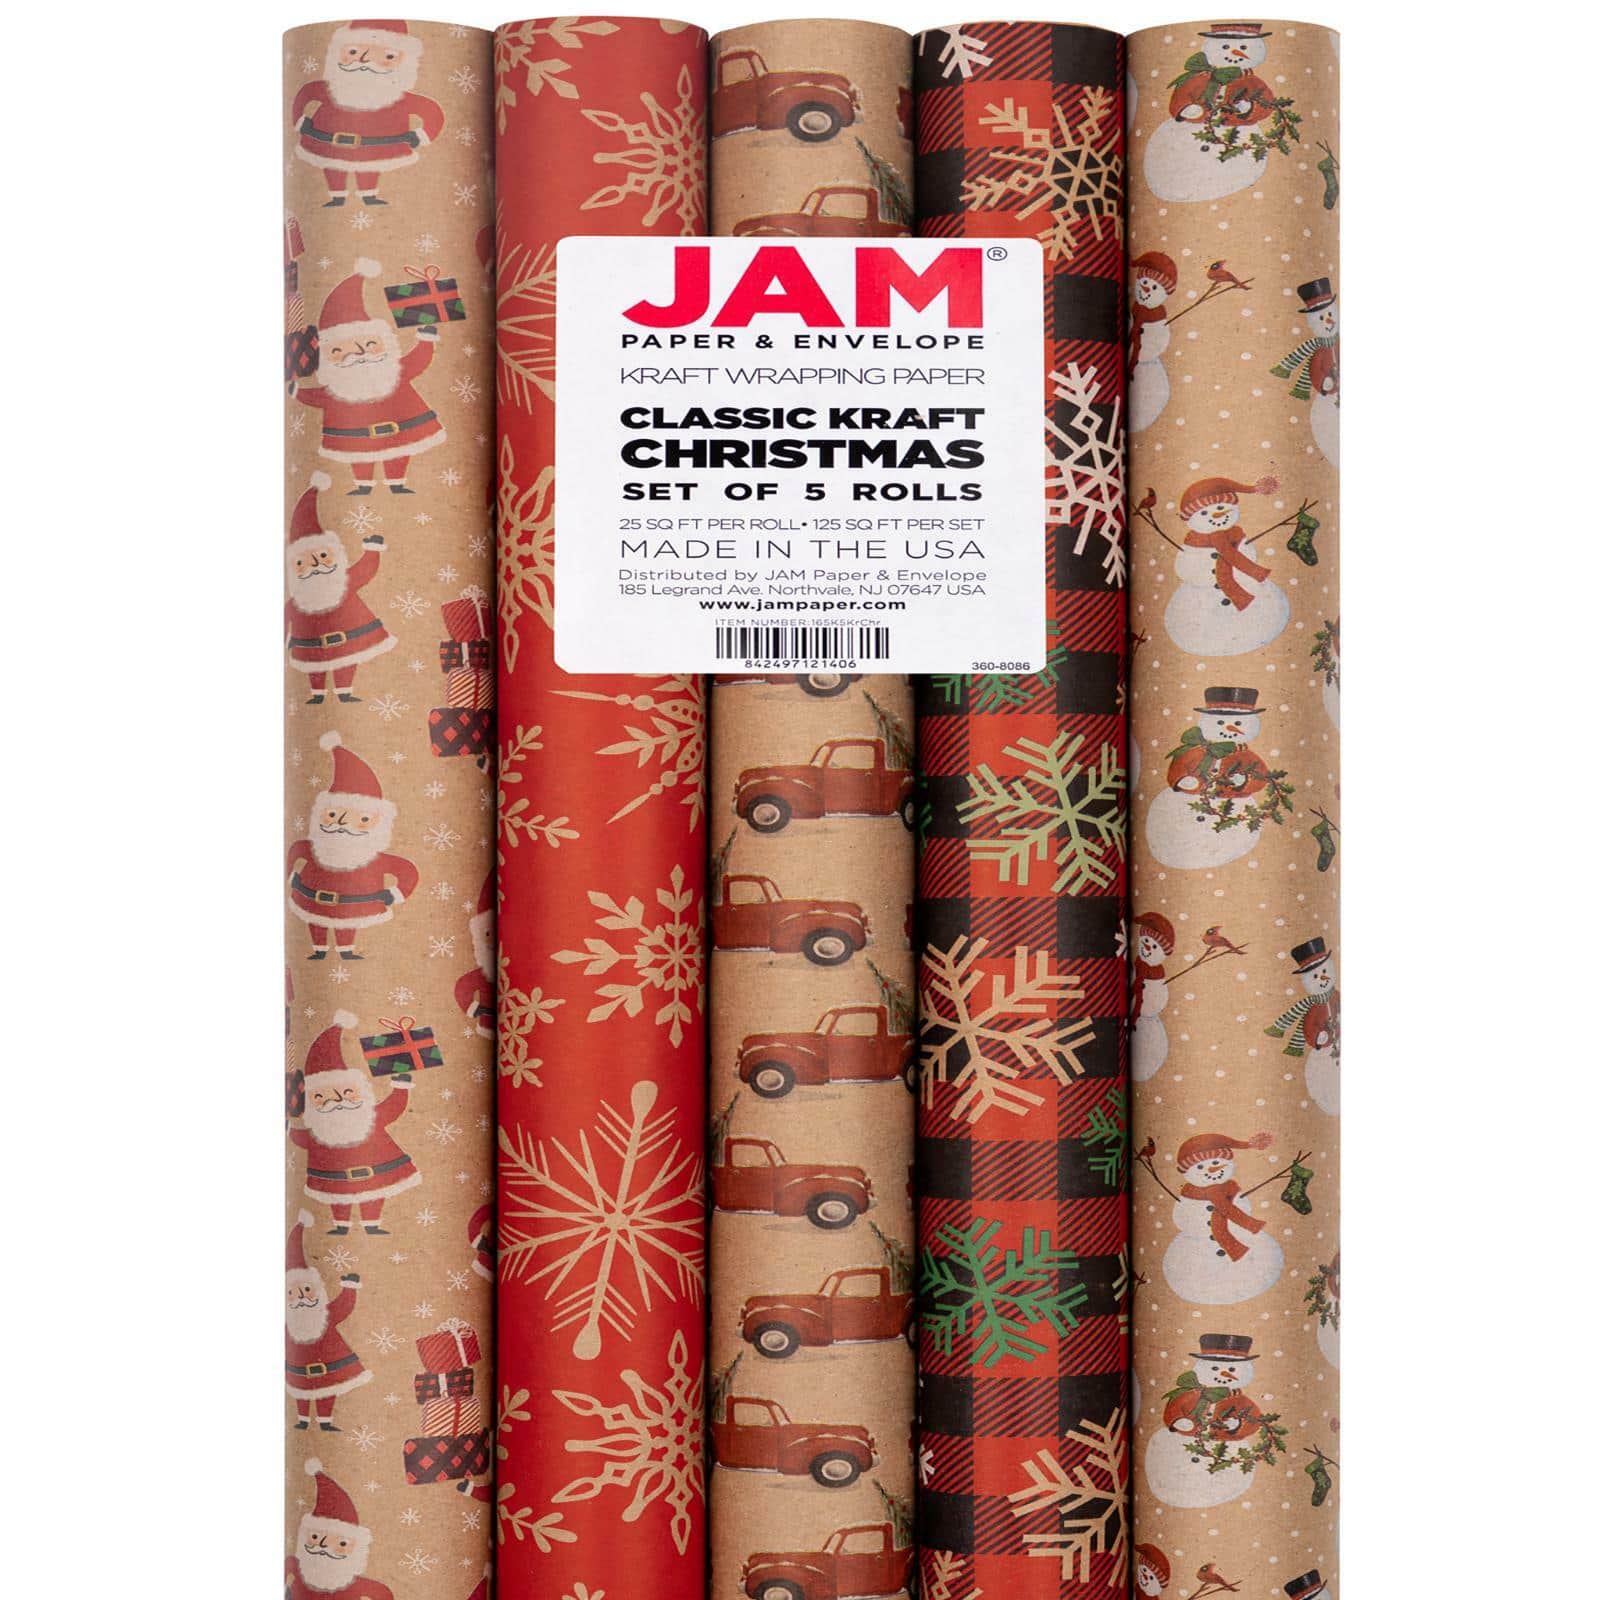 MOHAMM 10 PCS Retro Christmas Kraft Wrapping Paper Set for Holiday Gifts  Packing Craft Project Decoration Materials